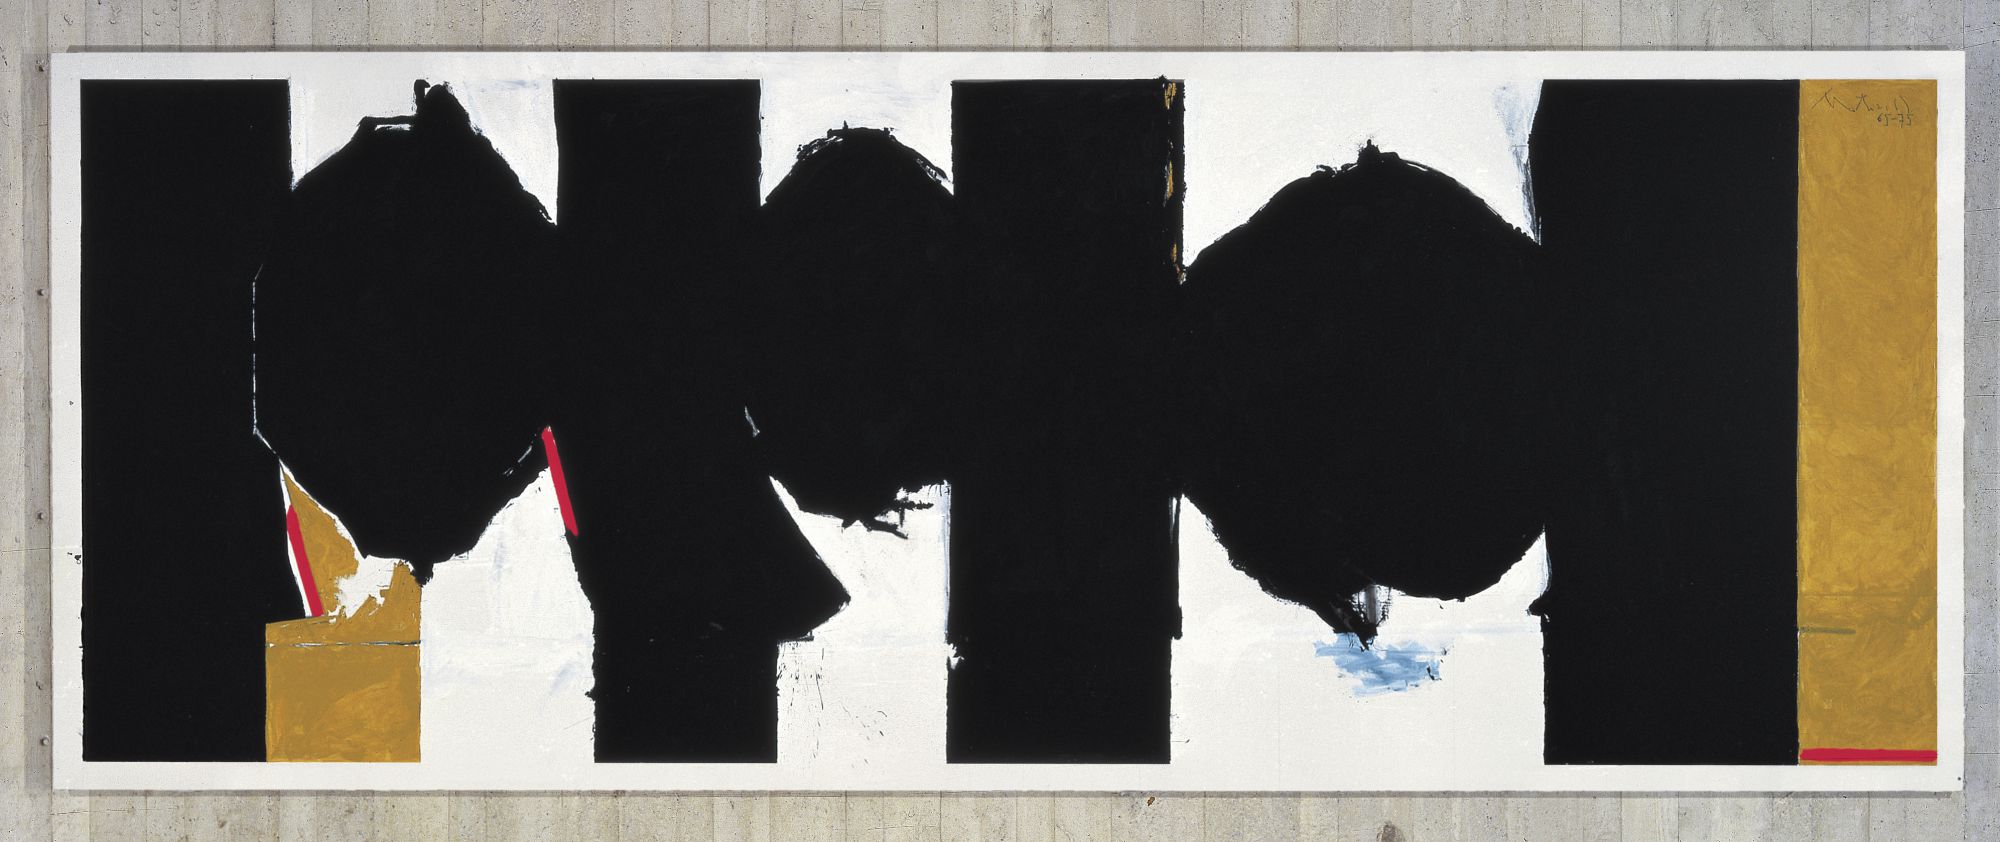 Elegy to the Spanish Republic No. 126, 1972–1975. Acrylic on canvas, 77 ¾ x 200 ¼ inches (197.5 x 508.6 cm)